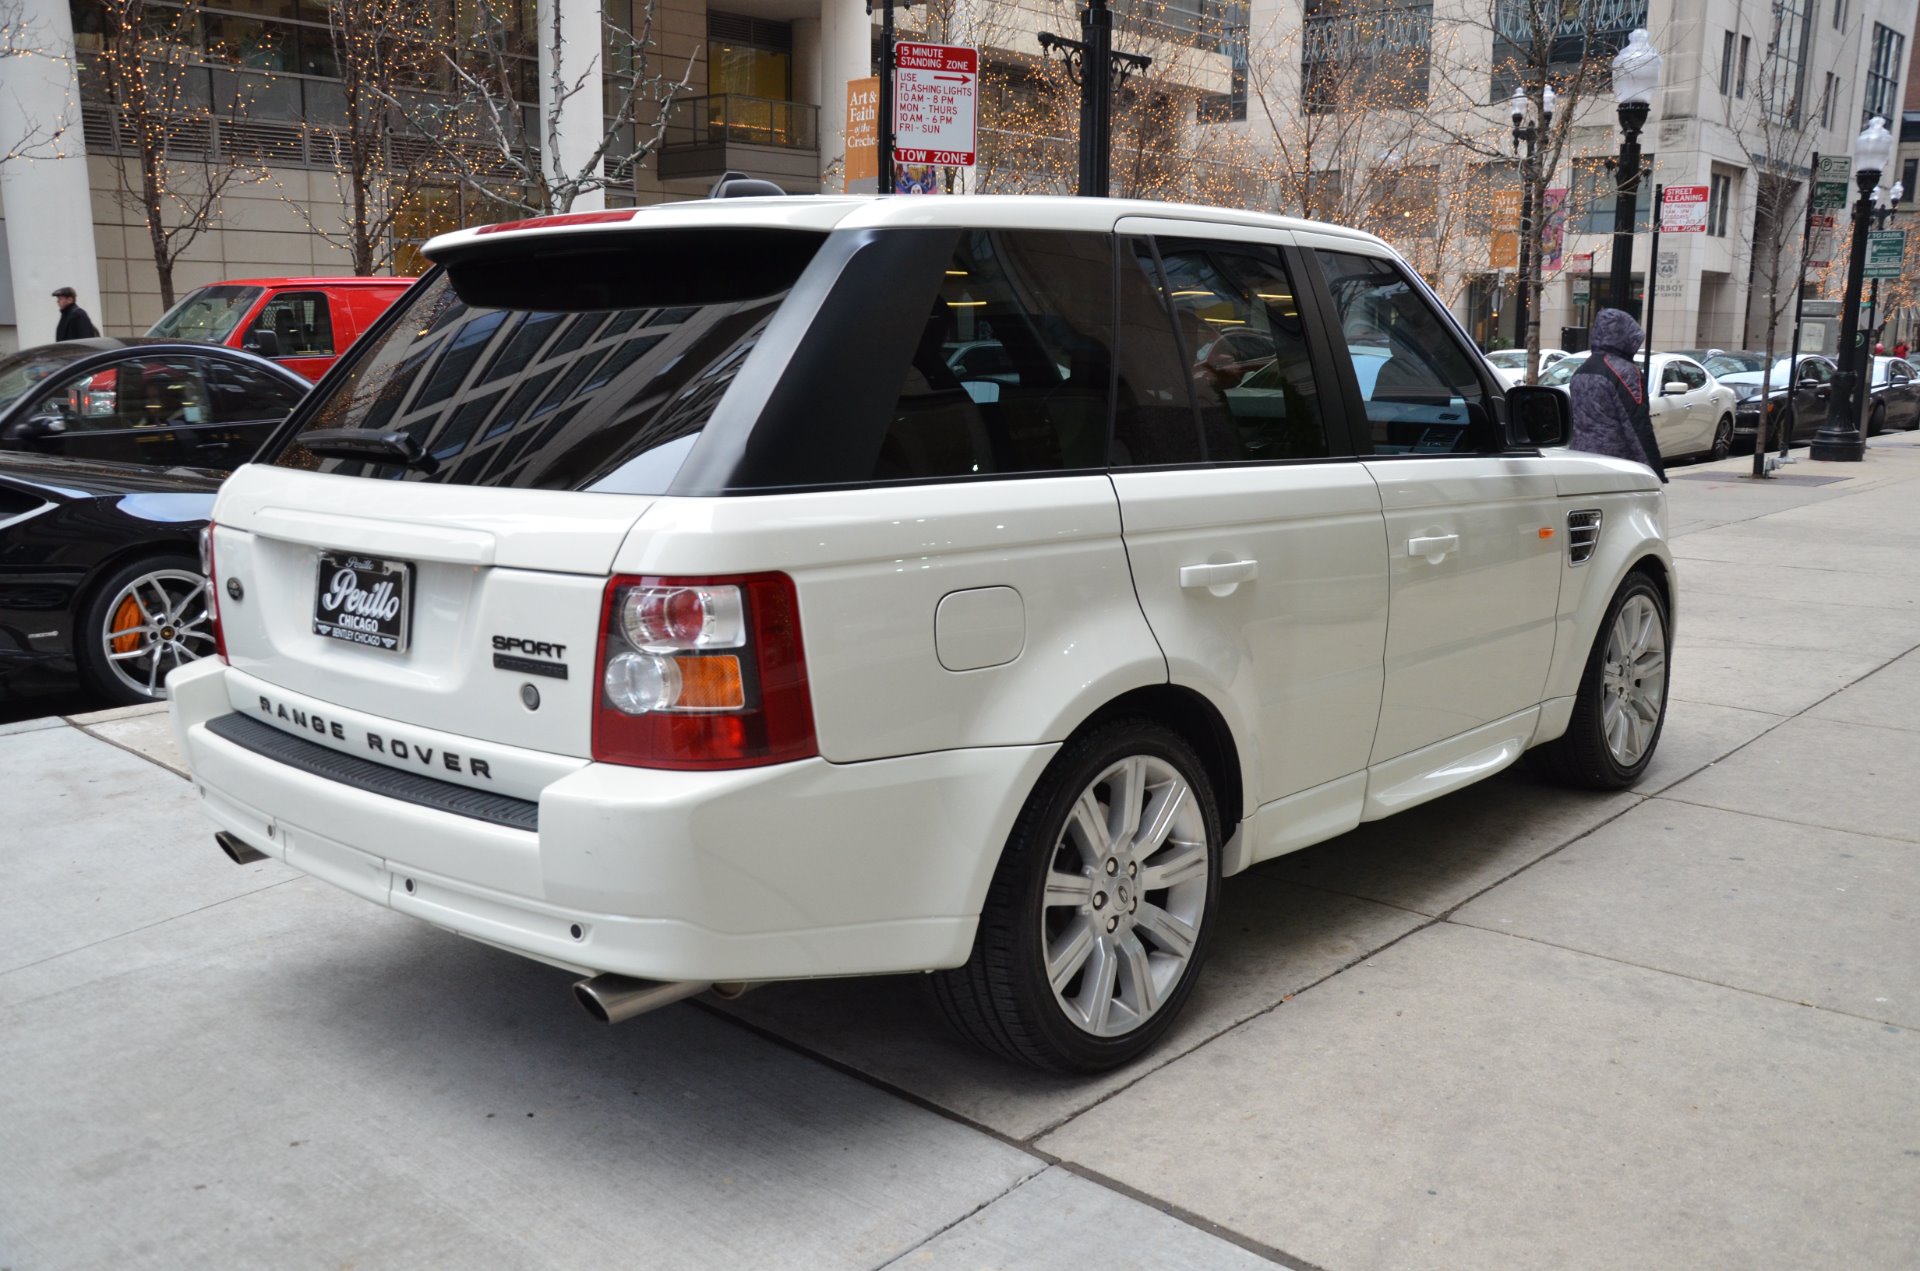 2008 Land Rover Range Rover Hse | Range Rover Hse, Range Rover Supercharged,  Range Rover